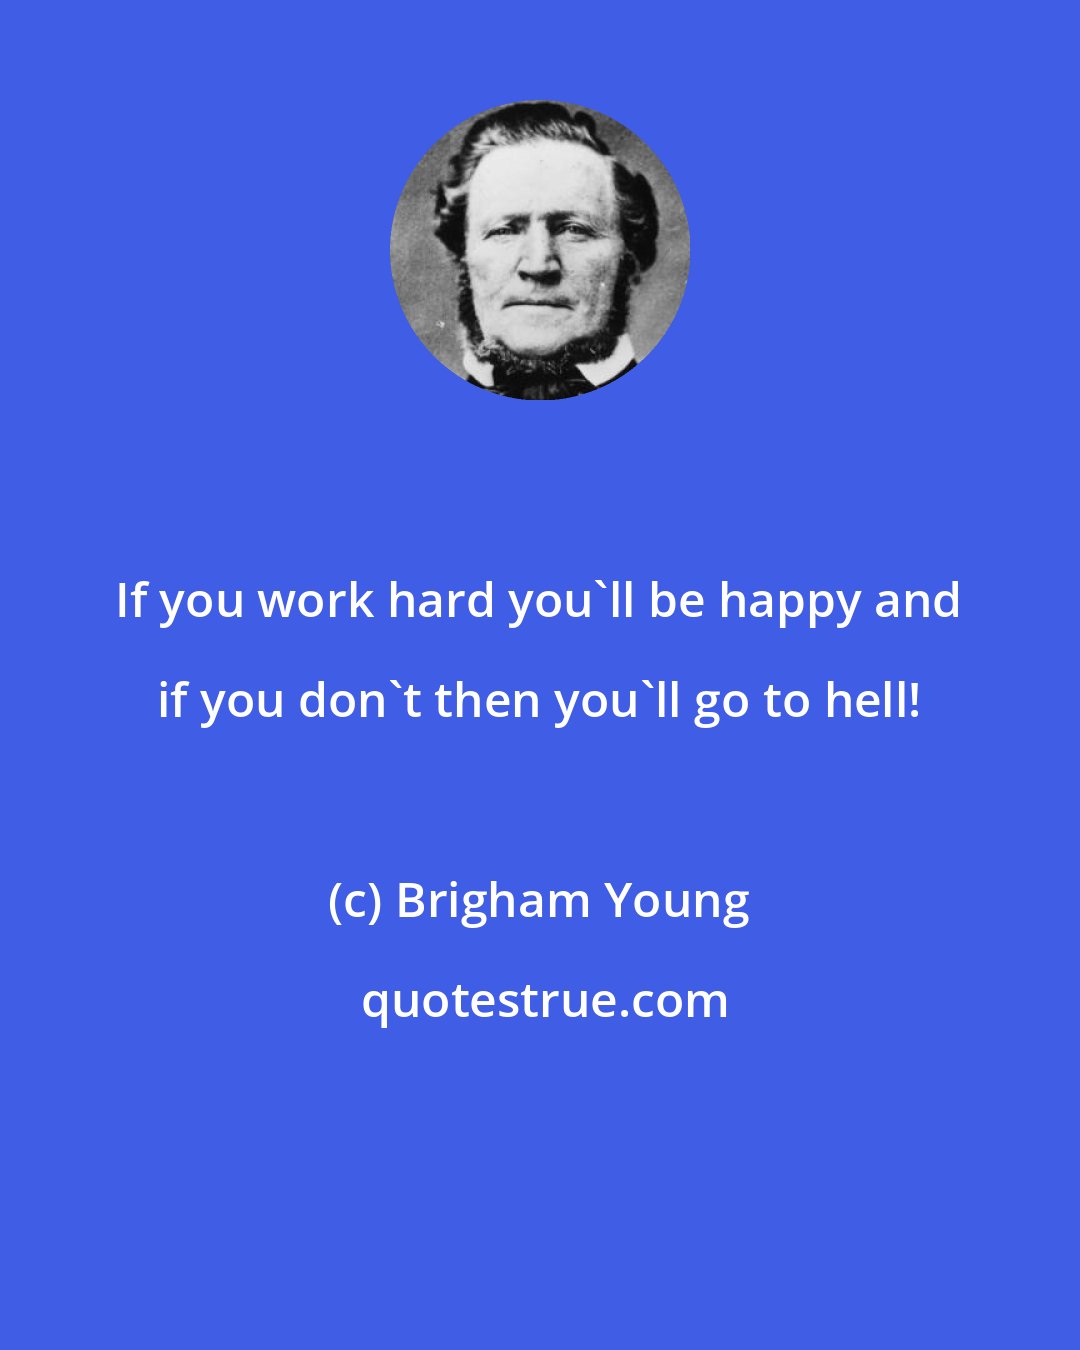 Brigham Young: If you work hard you'll be happy and if you don't then you'll go to hell!